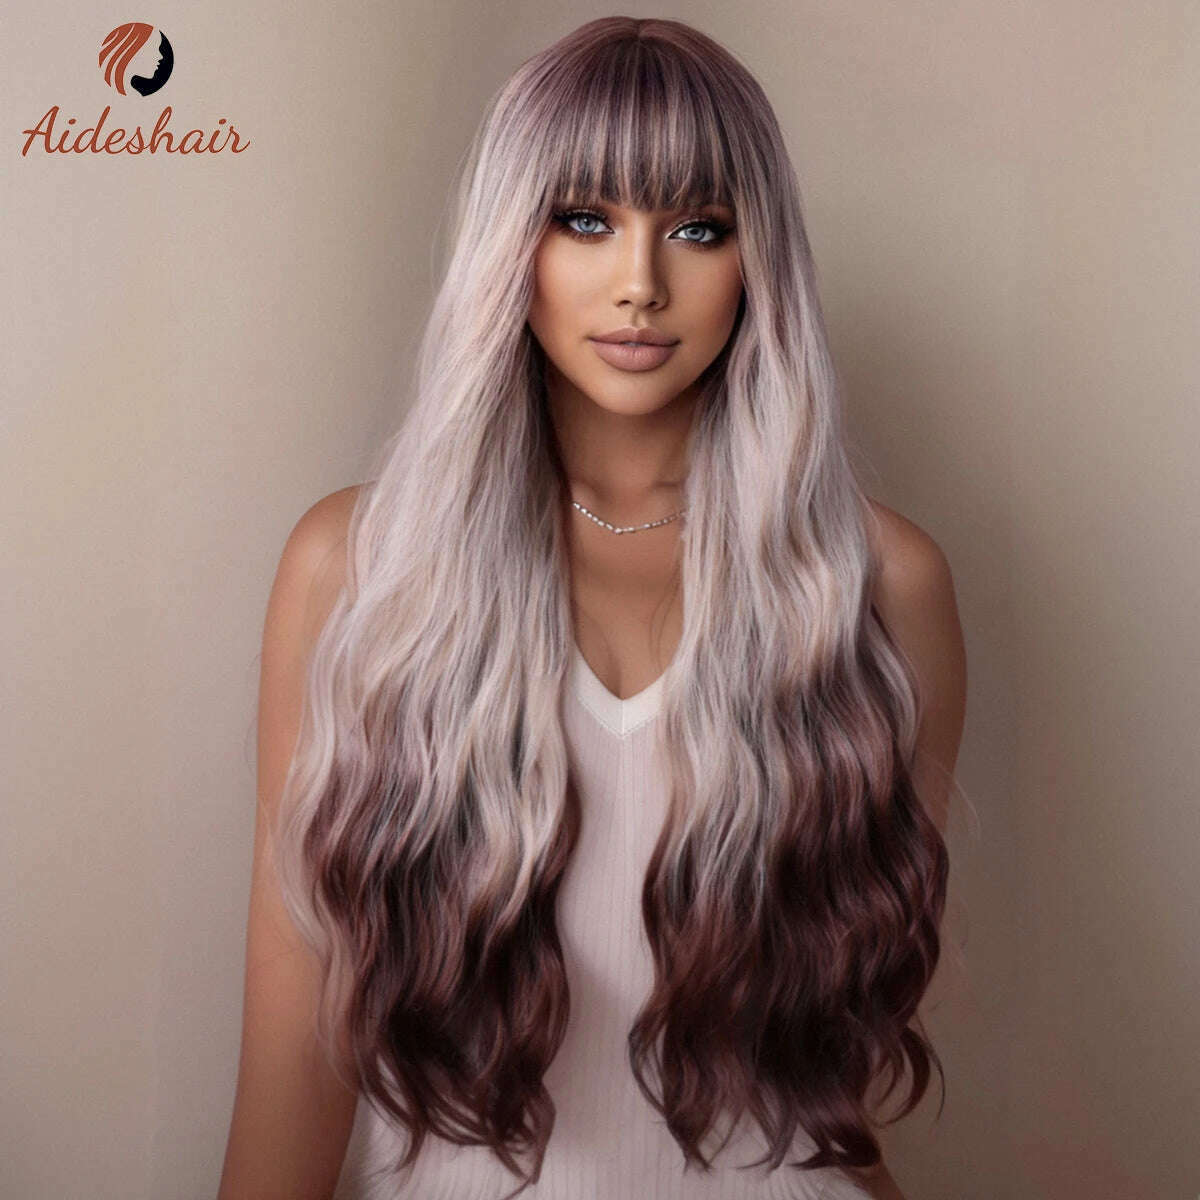 KIMLUD, Silver-ash highlights Straight bangs Long wavy wig for women's wig Synthetic Heat resistant fiber Daily Cosplay (28 inches), BBW1178-1 / 1 PC / 28inches, KIMLUD Womens Clothes